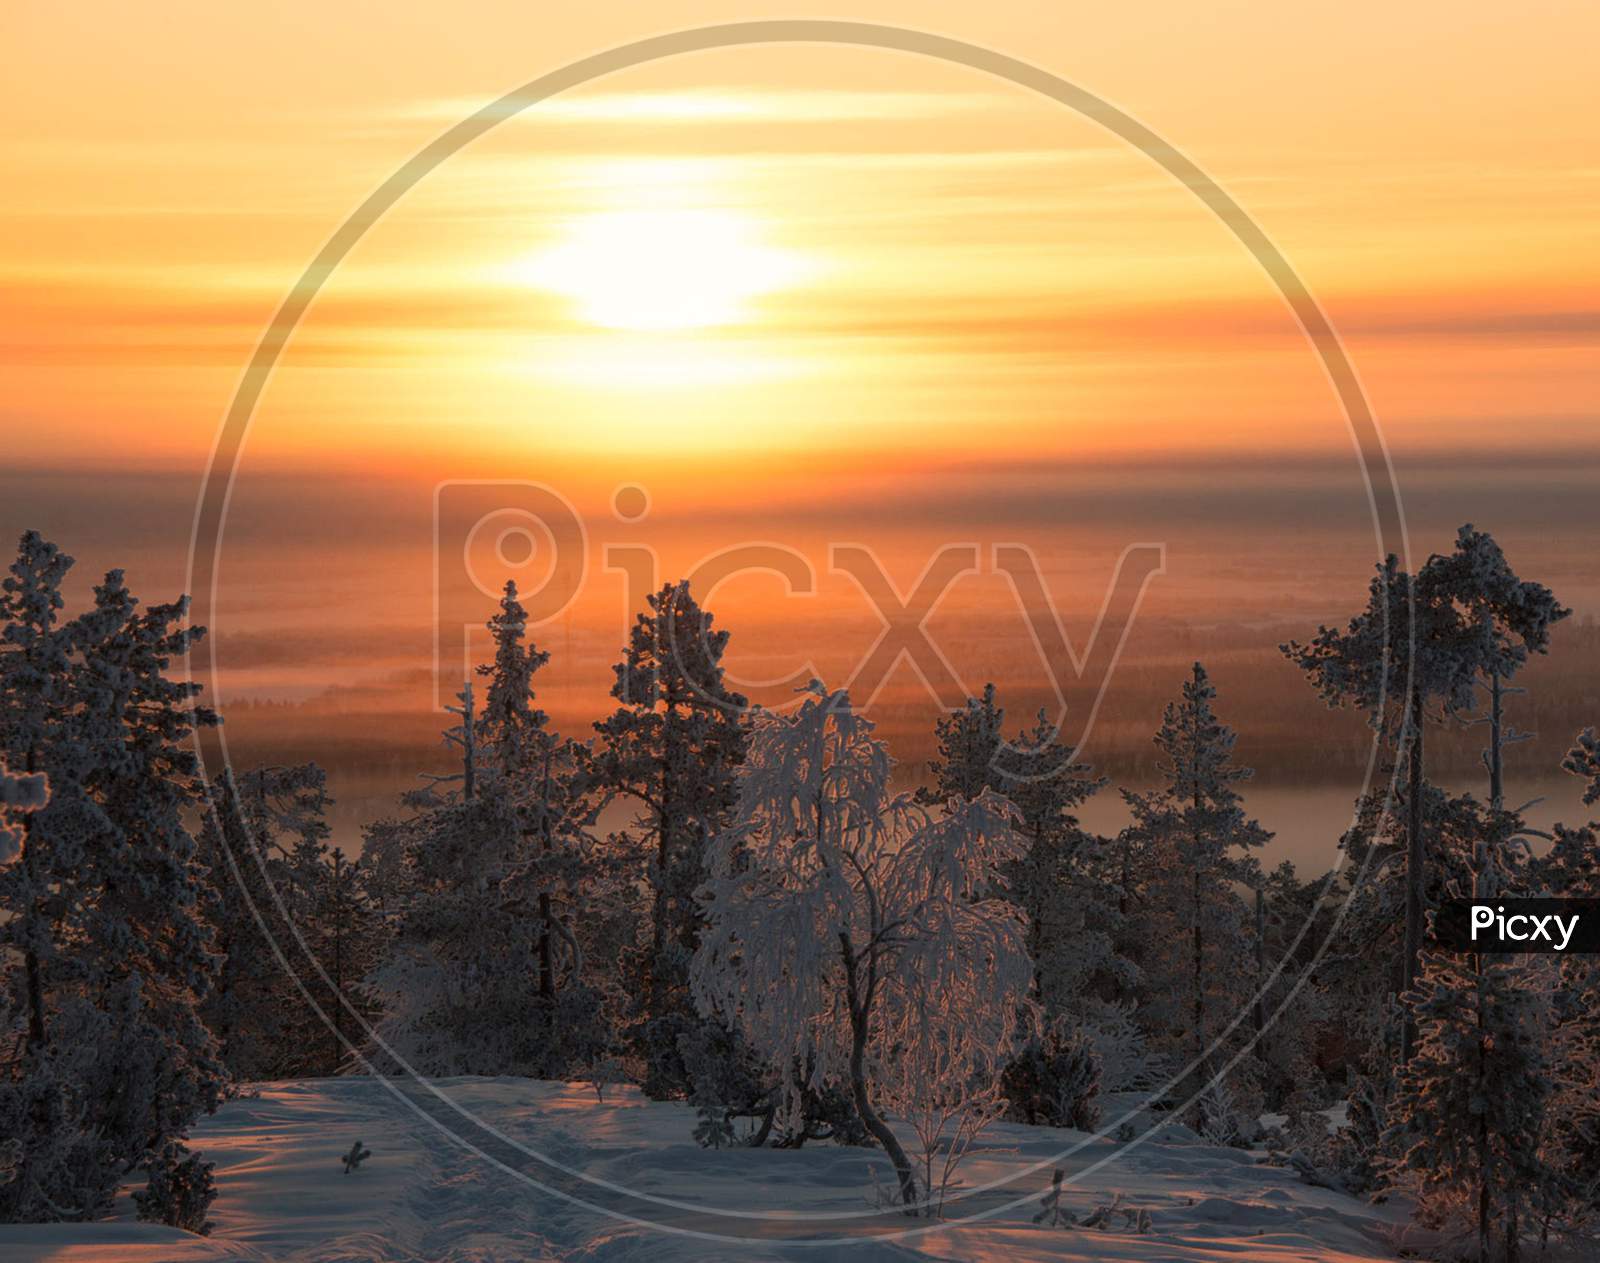 Beautiful pictures of  Finland